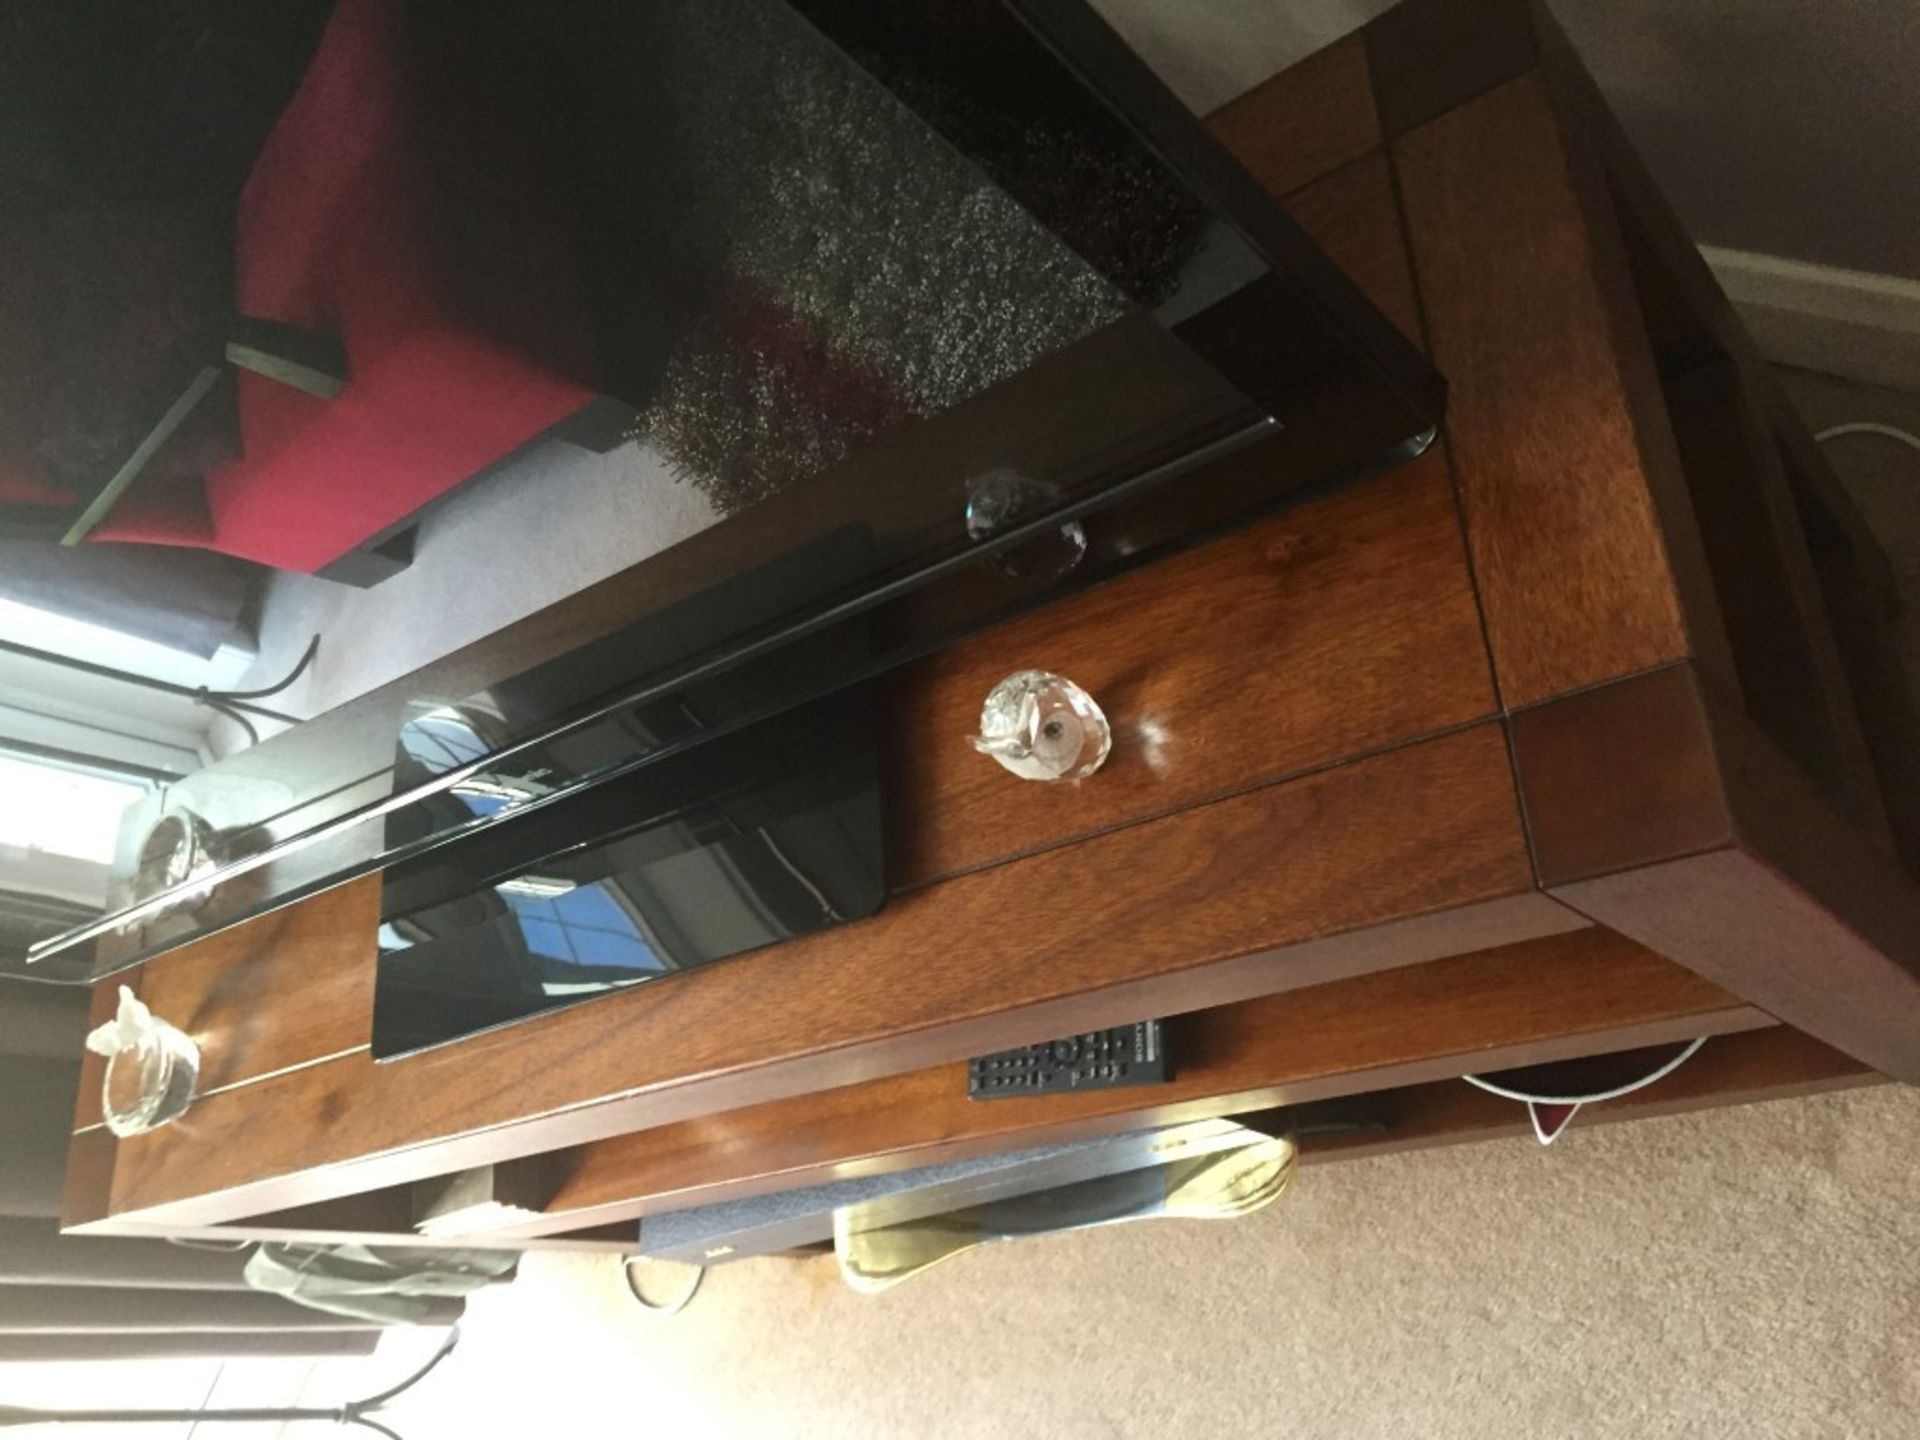 1 x Wooden TV Table With Shelves - Walnut Finish - Preowned In Good Condition - Dimensions: W114 x - Image 4 of 4